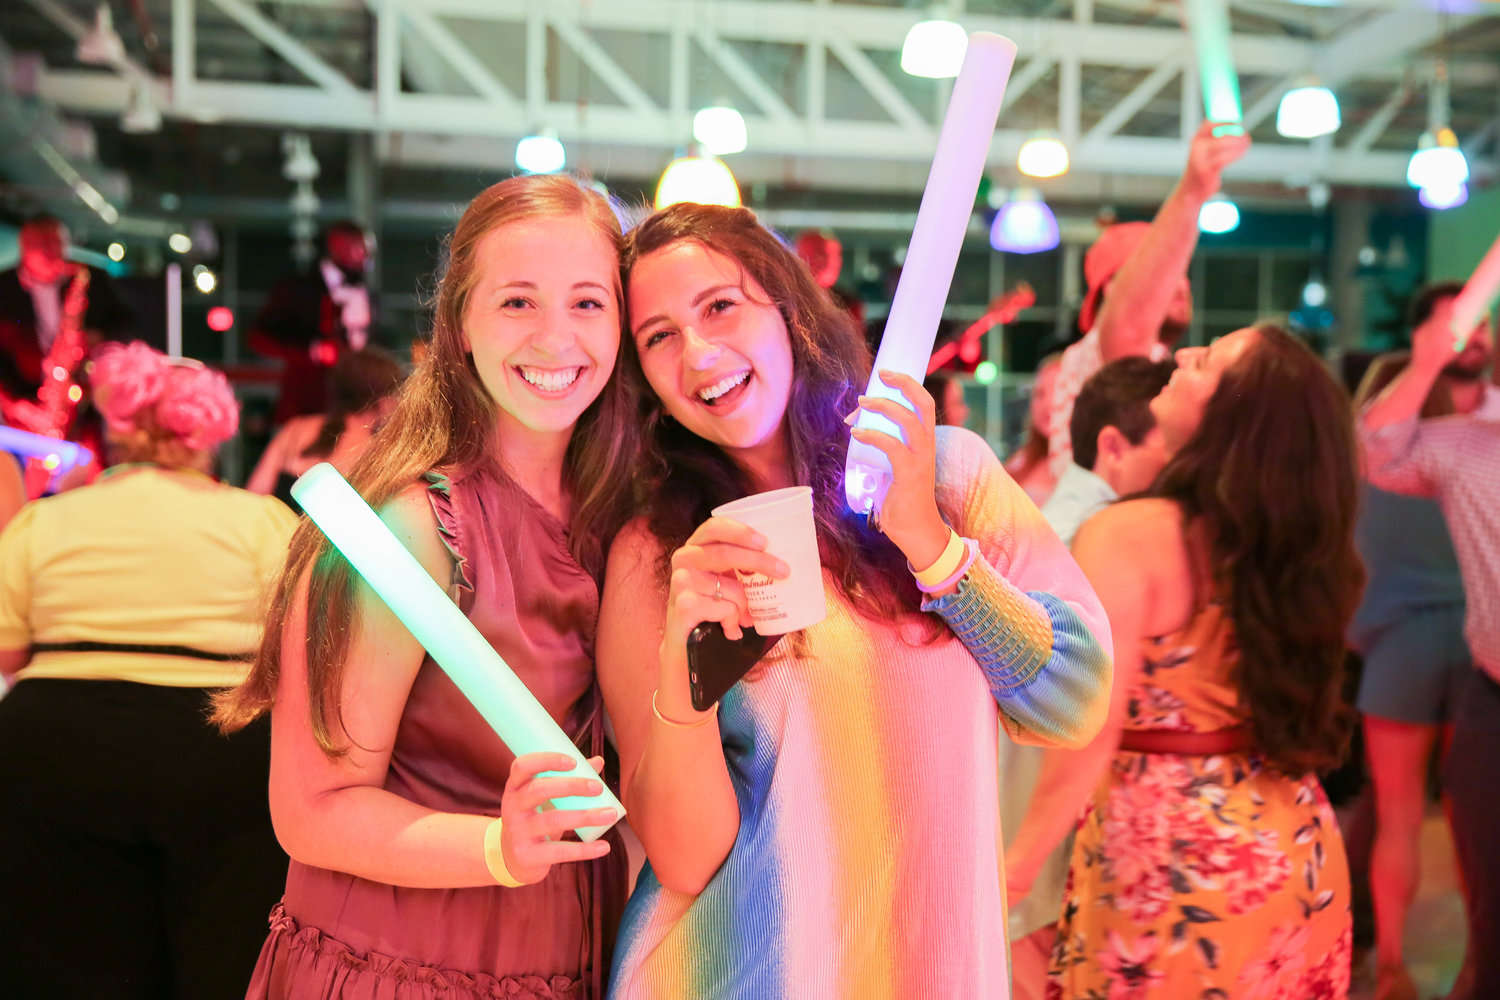 Neon Night will be held this Saturday, from 8 p.m.-midnight, at the Mississippi Children’s Museum.